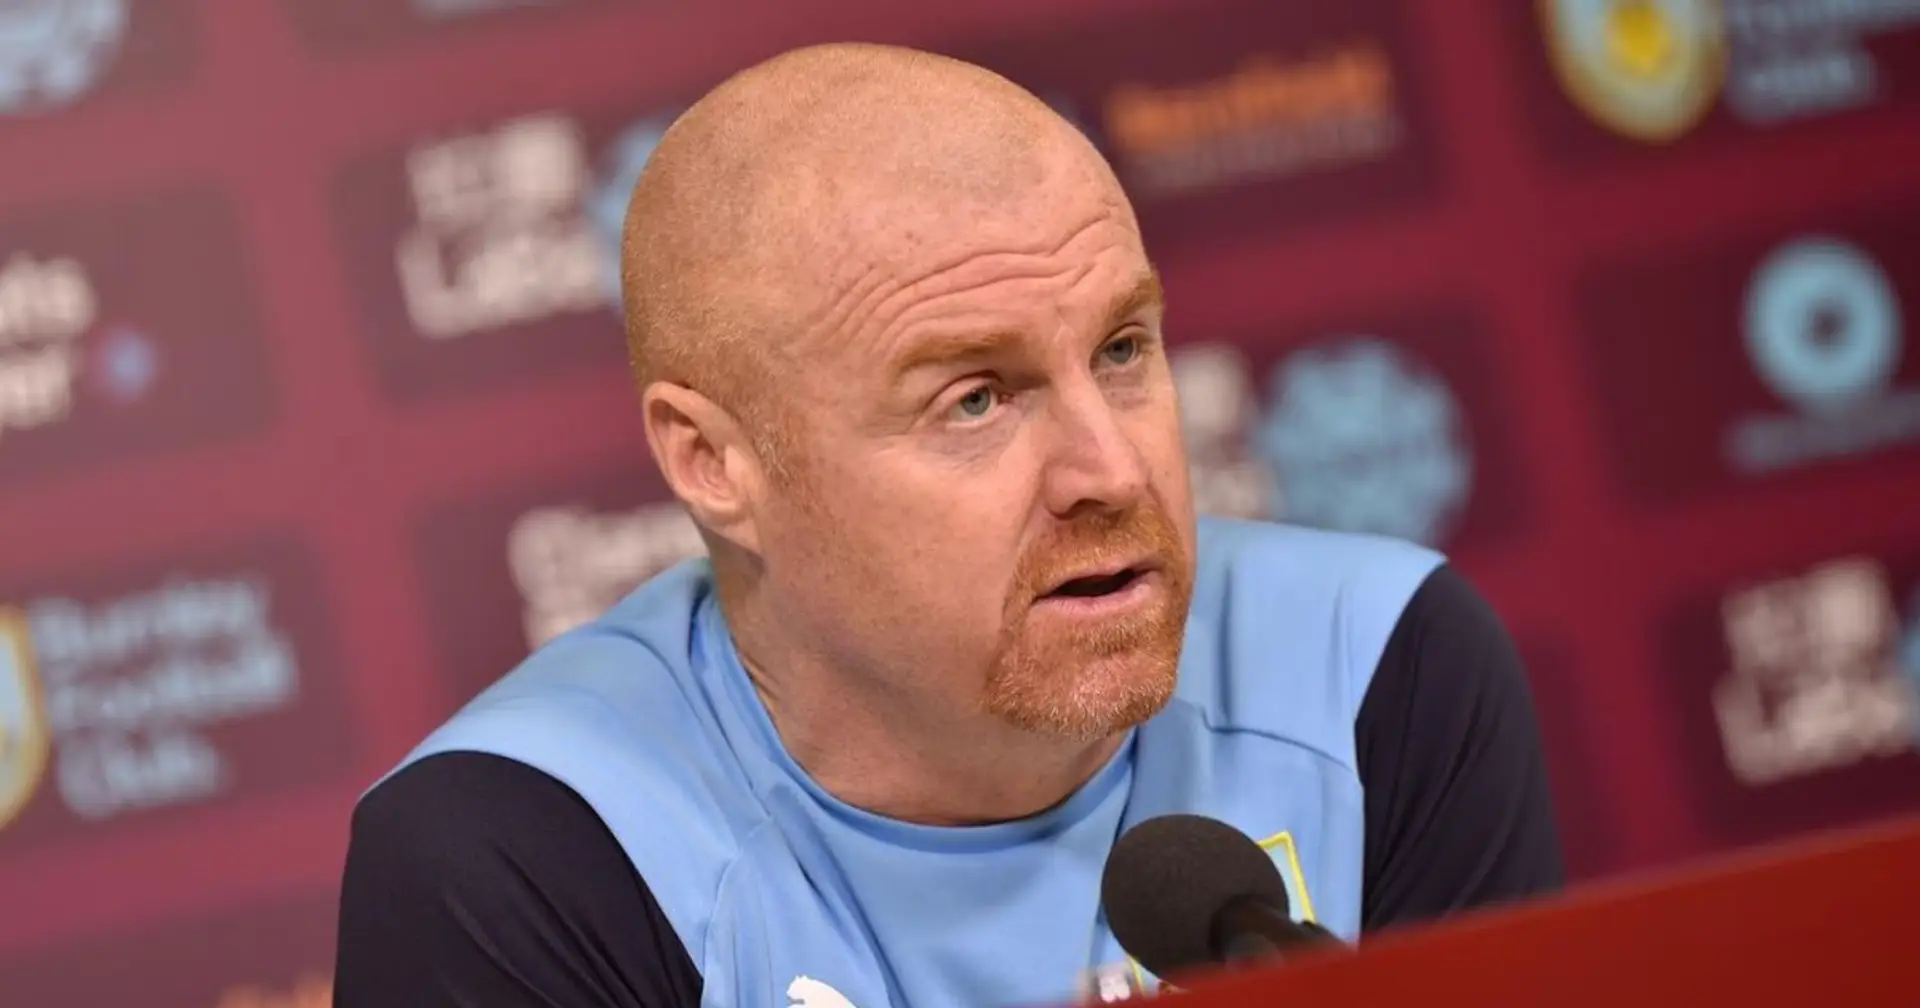 Burnley could be missing up to 9 first-team players for Man United clash, Sean Dyche confirms